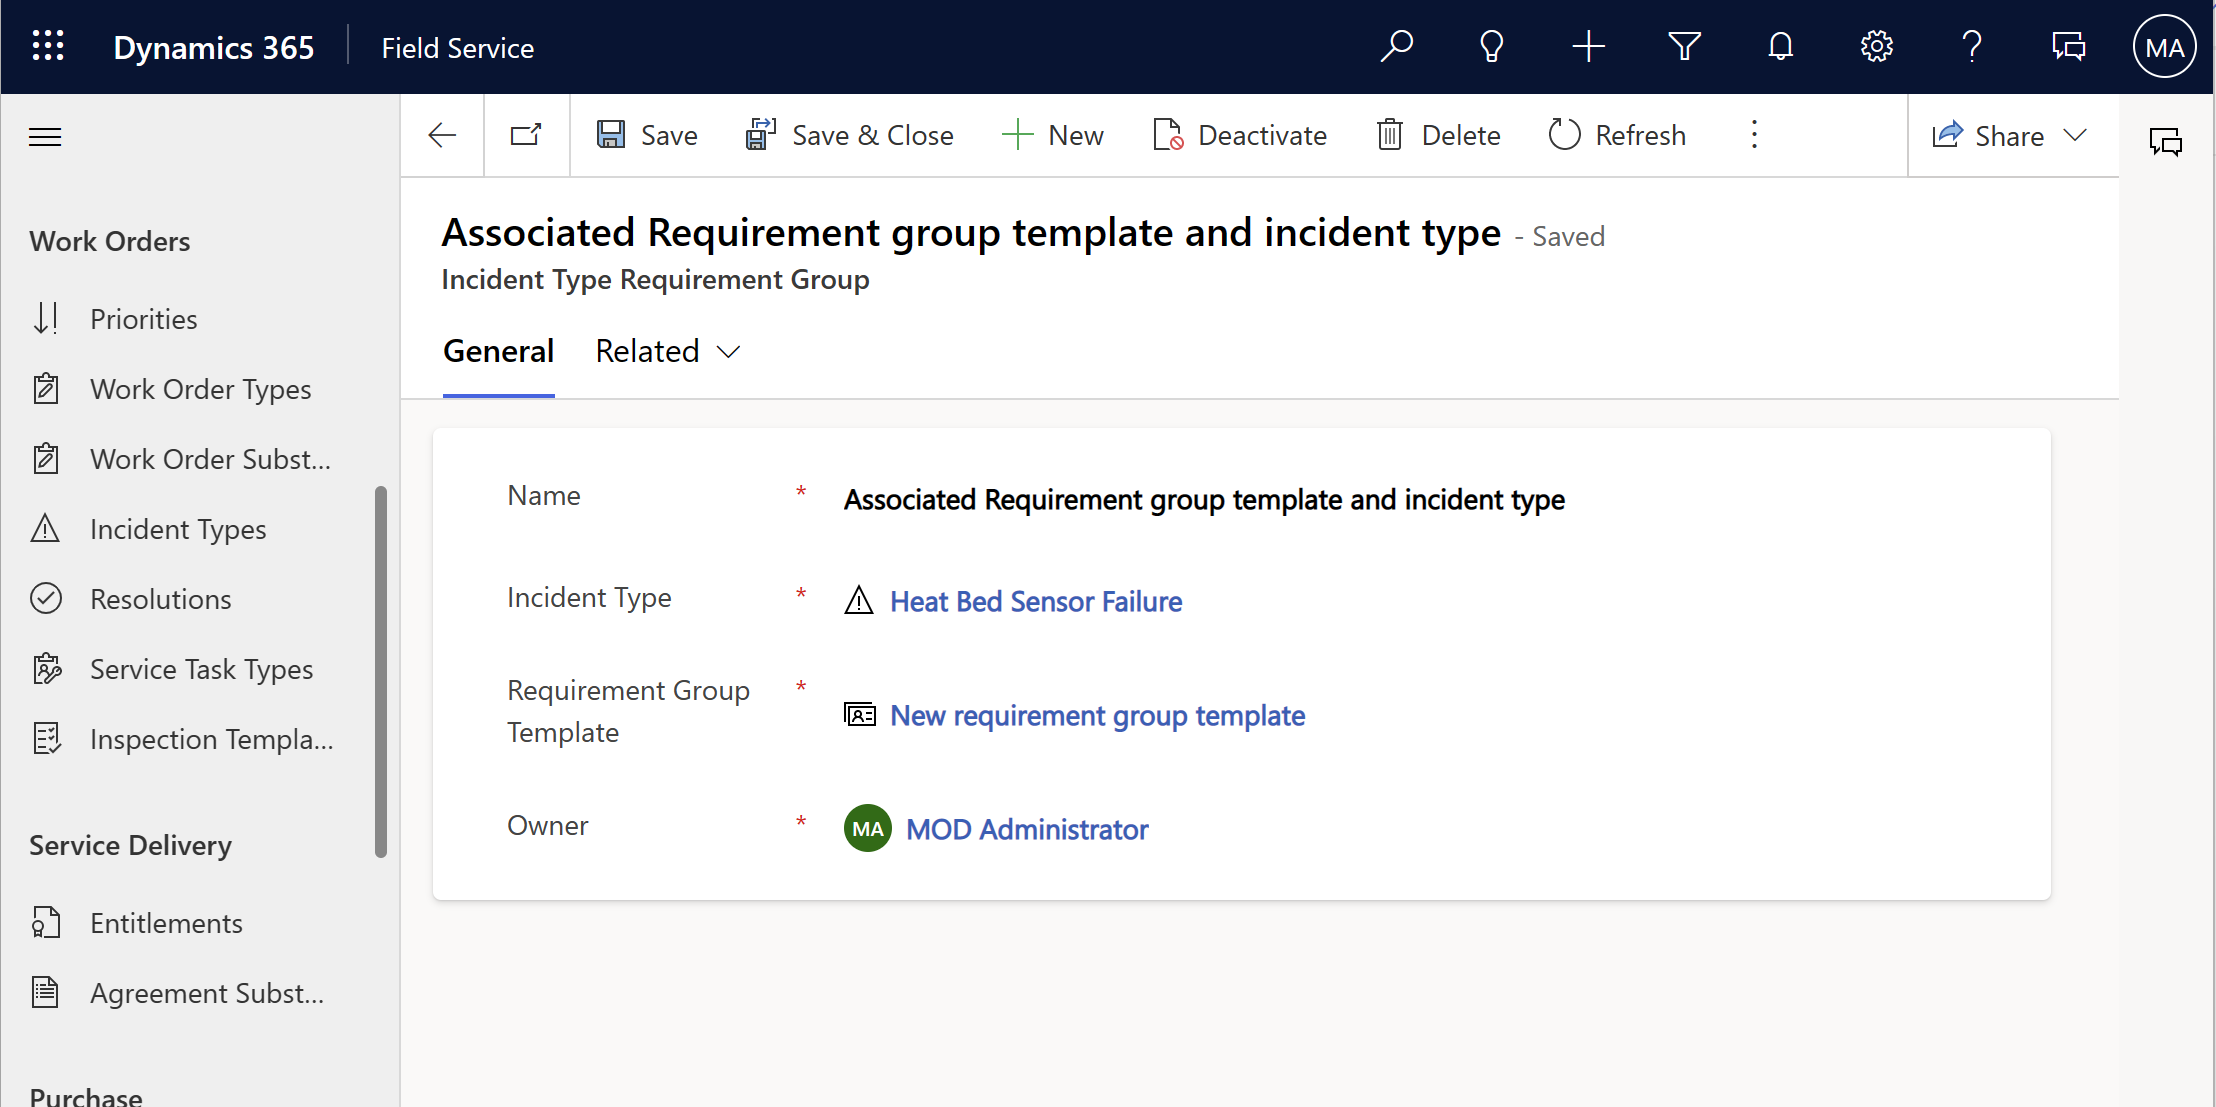 Screenshot of an incident type requirement group form in Field Service.